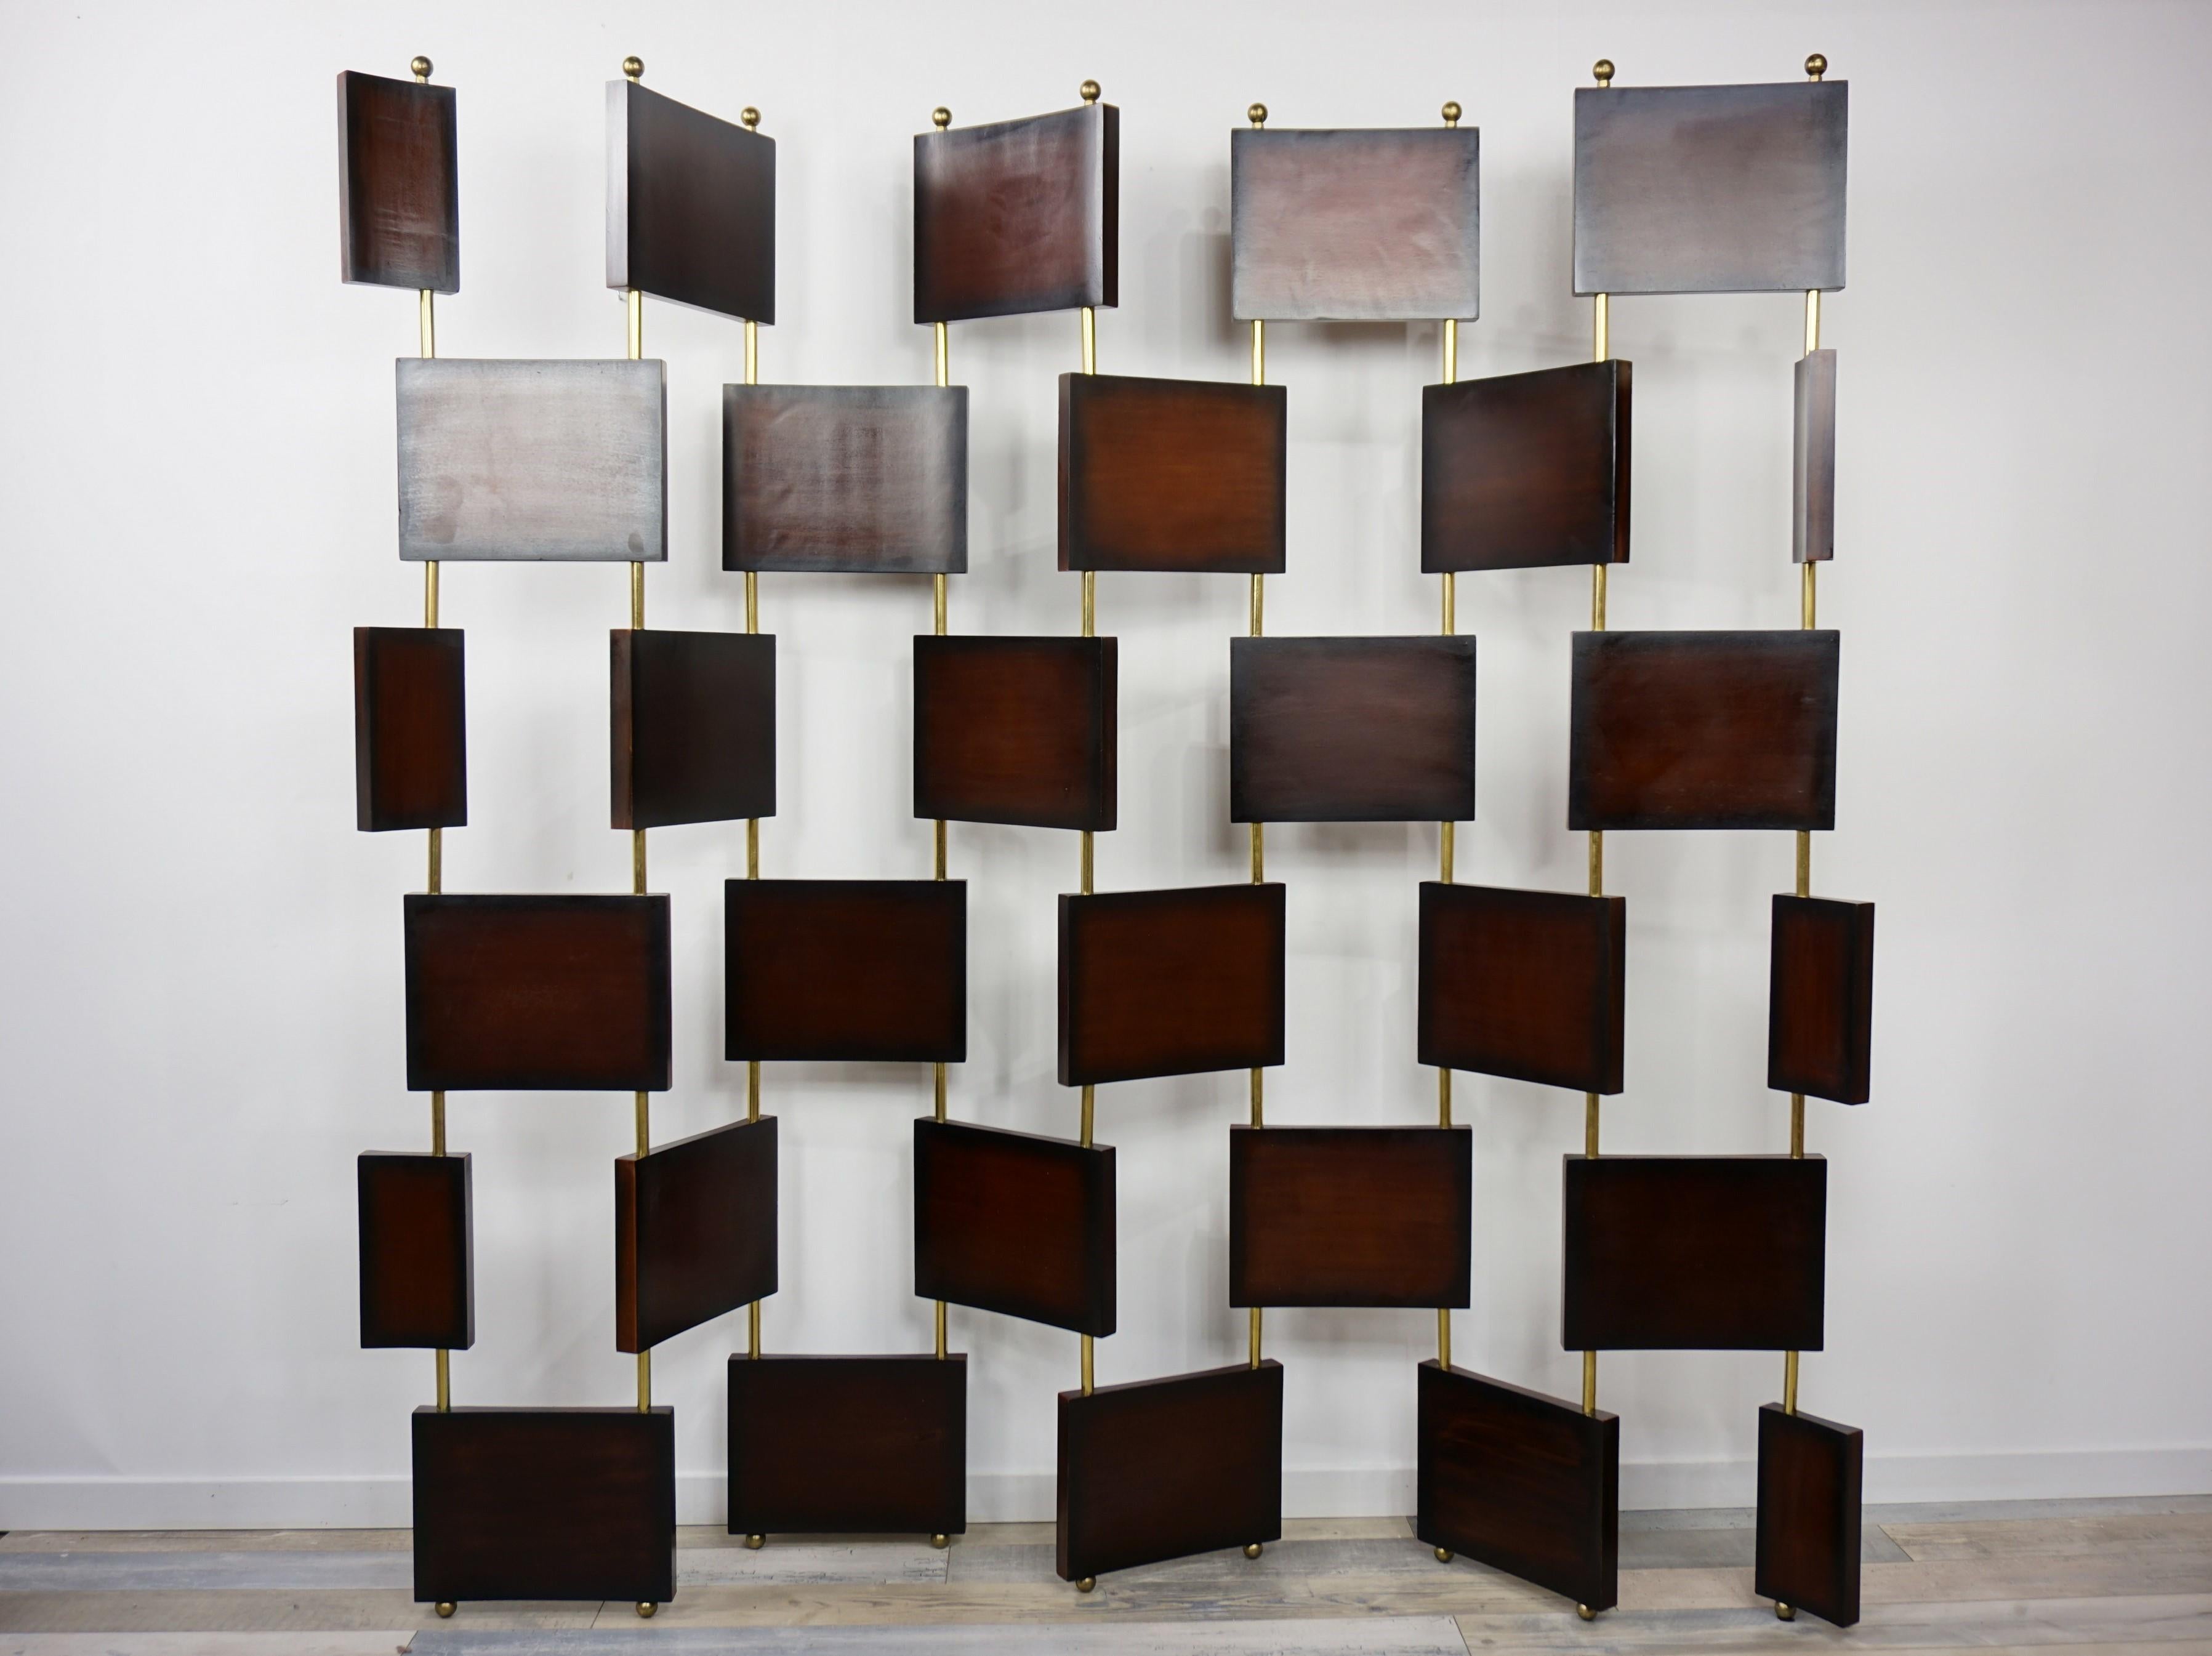 Magnificent and highly decorative screen divider, at the manner of Eileen Gray, in teak wooden finish and brass.